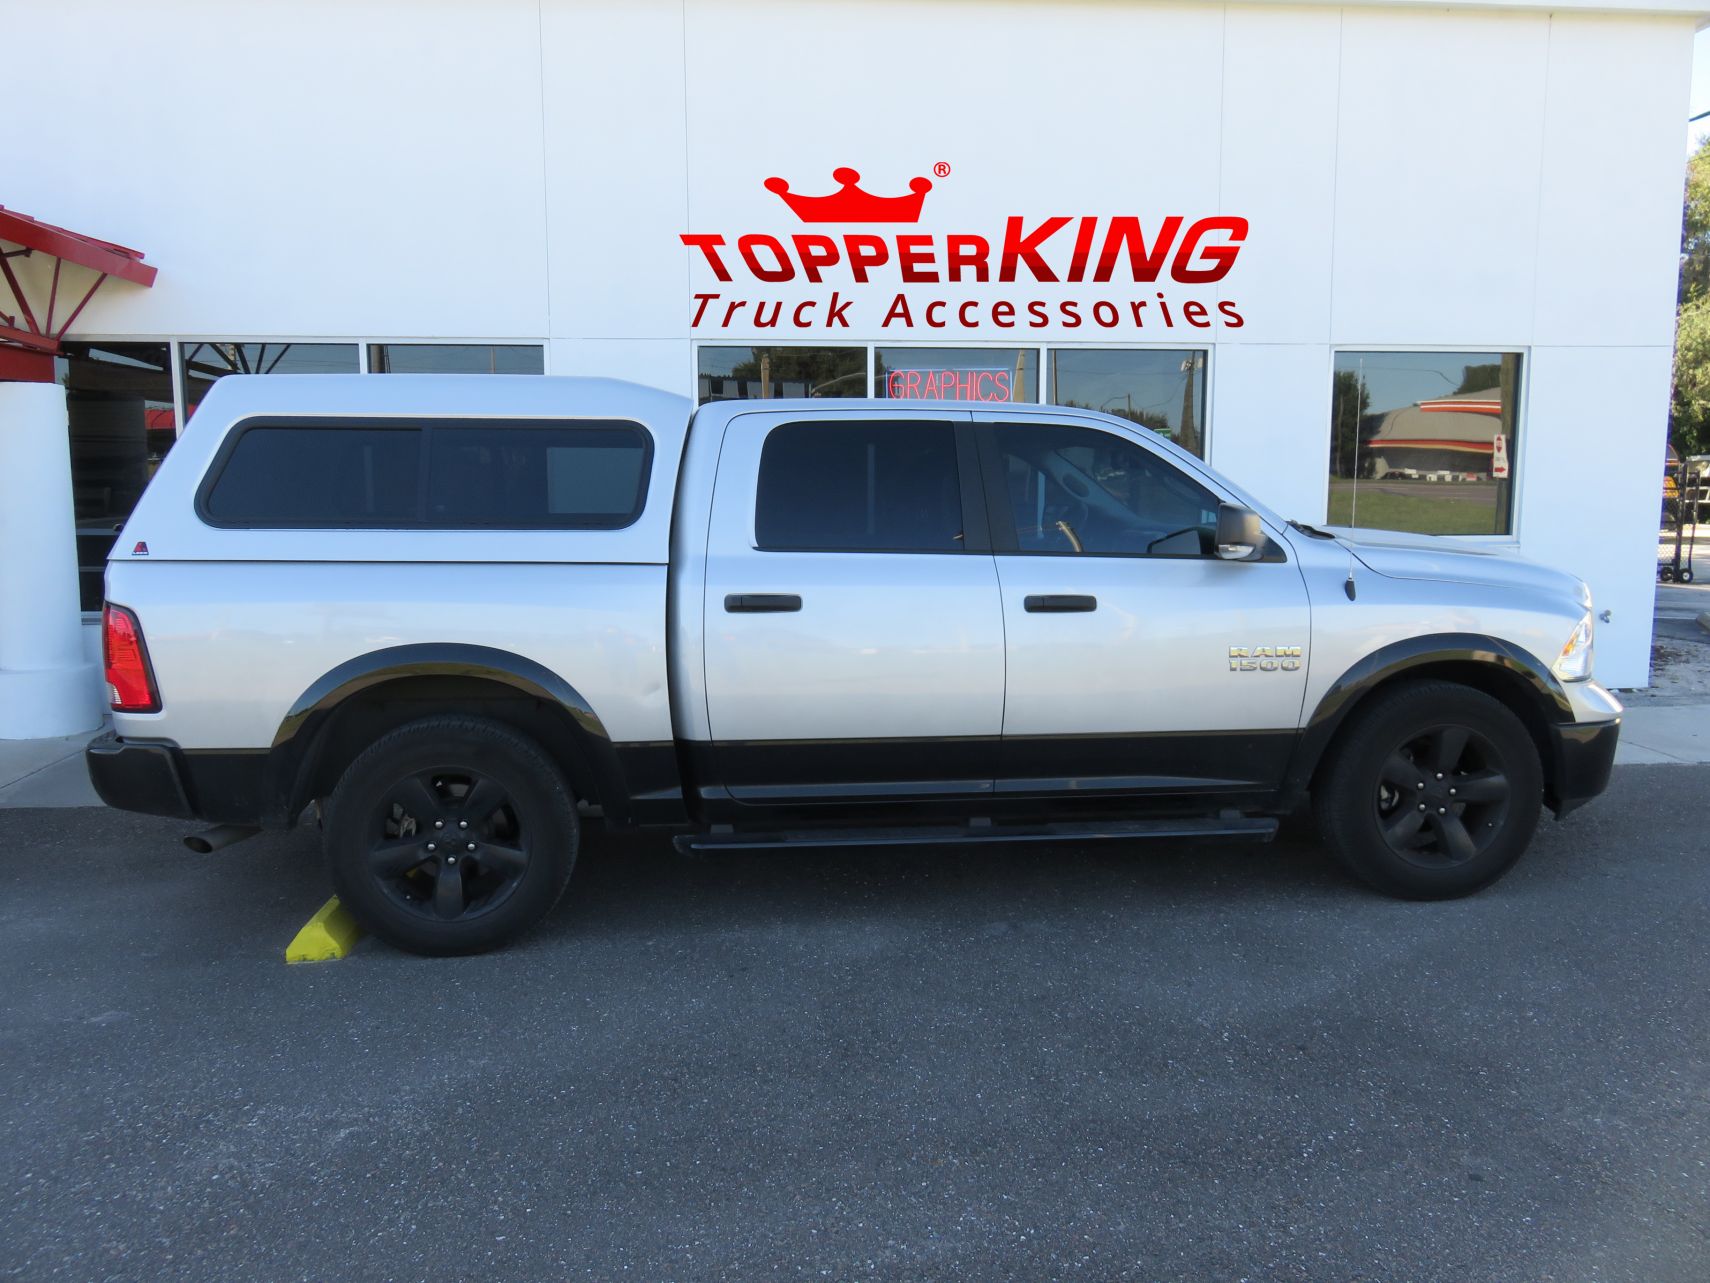 2015 Dodge RAM with LEER 180 Fiberglass Topper, Black Out Steps, Tint, and Hitch by TopperKING Brandon 813-689-2449 or Clearwater FL 727-530-9066. Call Now!